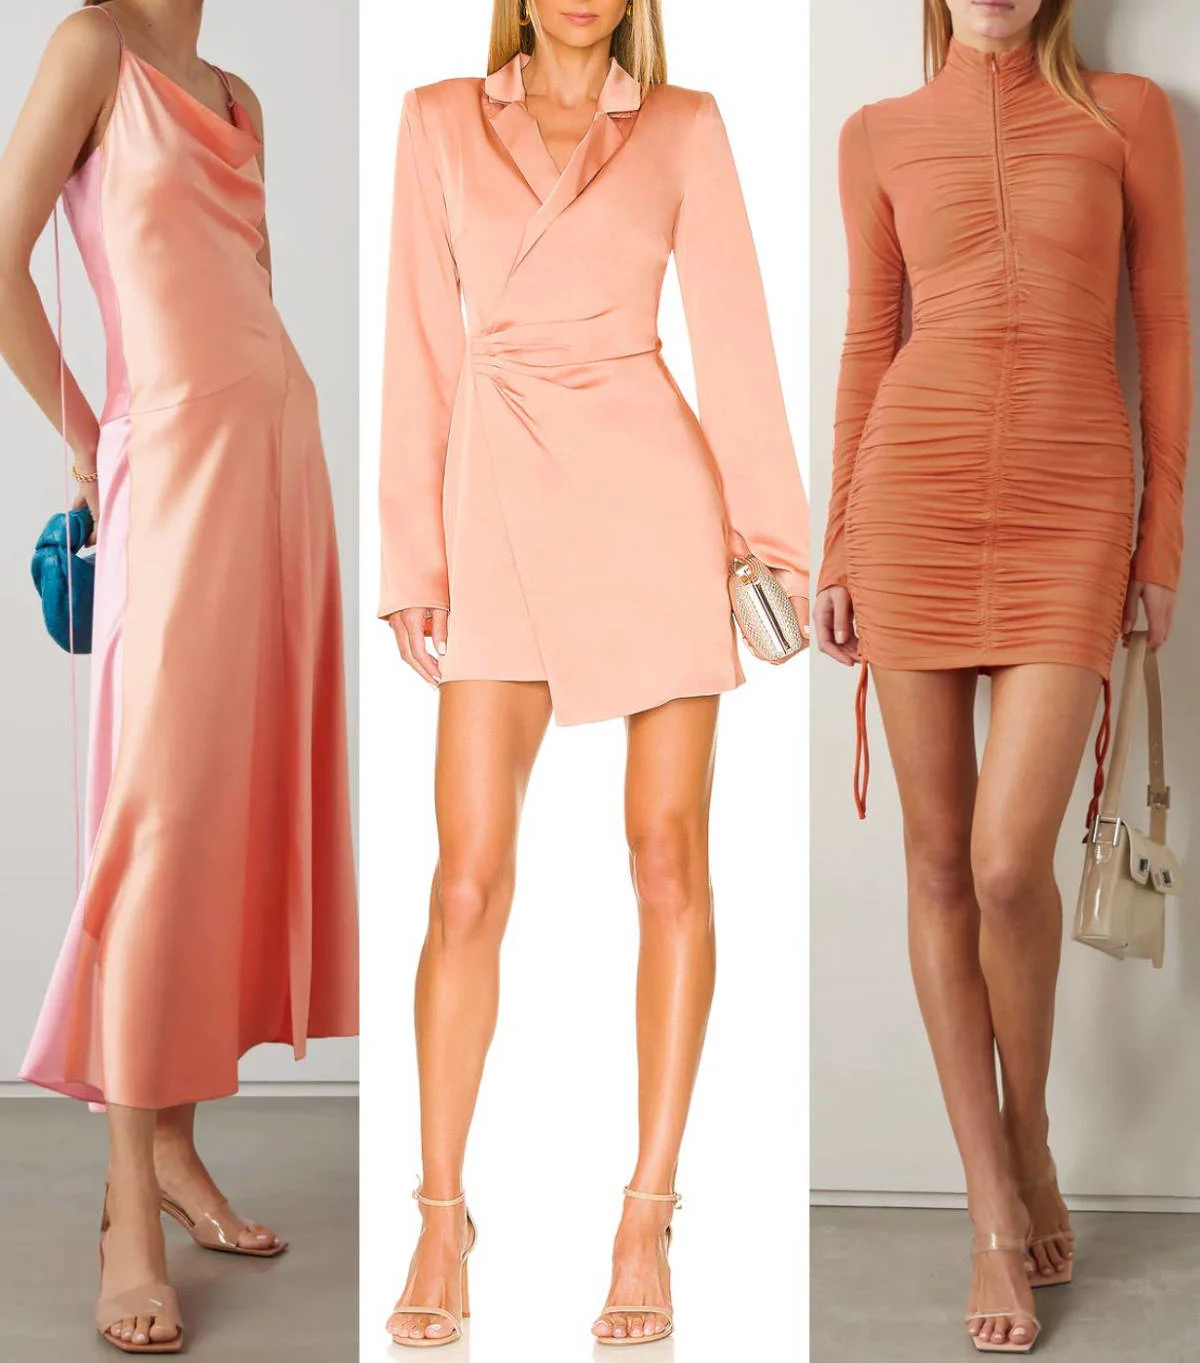 3 women wearing different nude shoes with peach dress outfits.